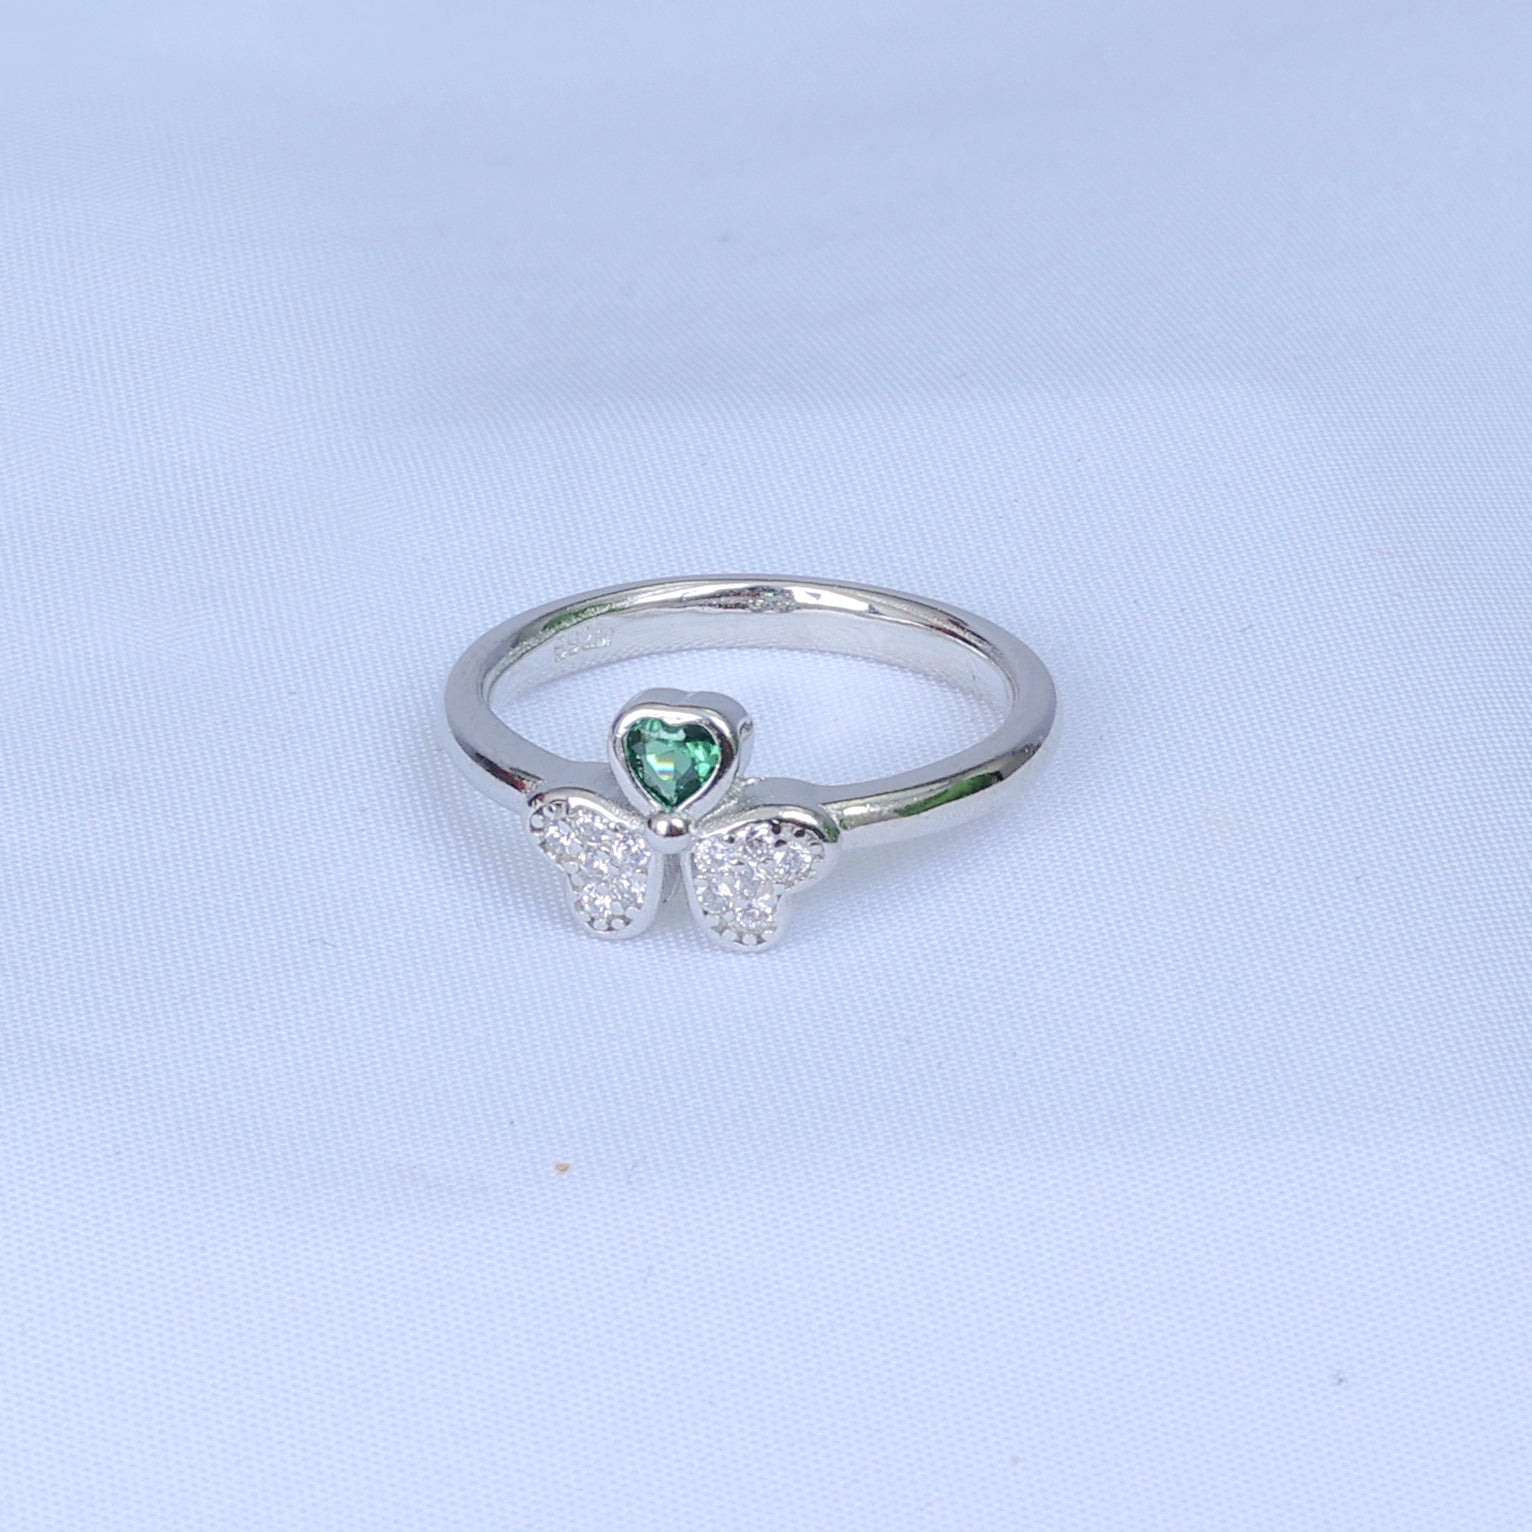 Buy Green Diamond Ring Designs Online in India | Candere by Kalyan Jewellers